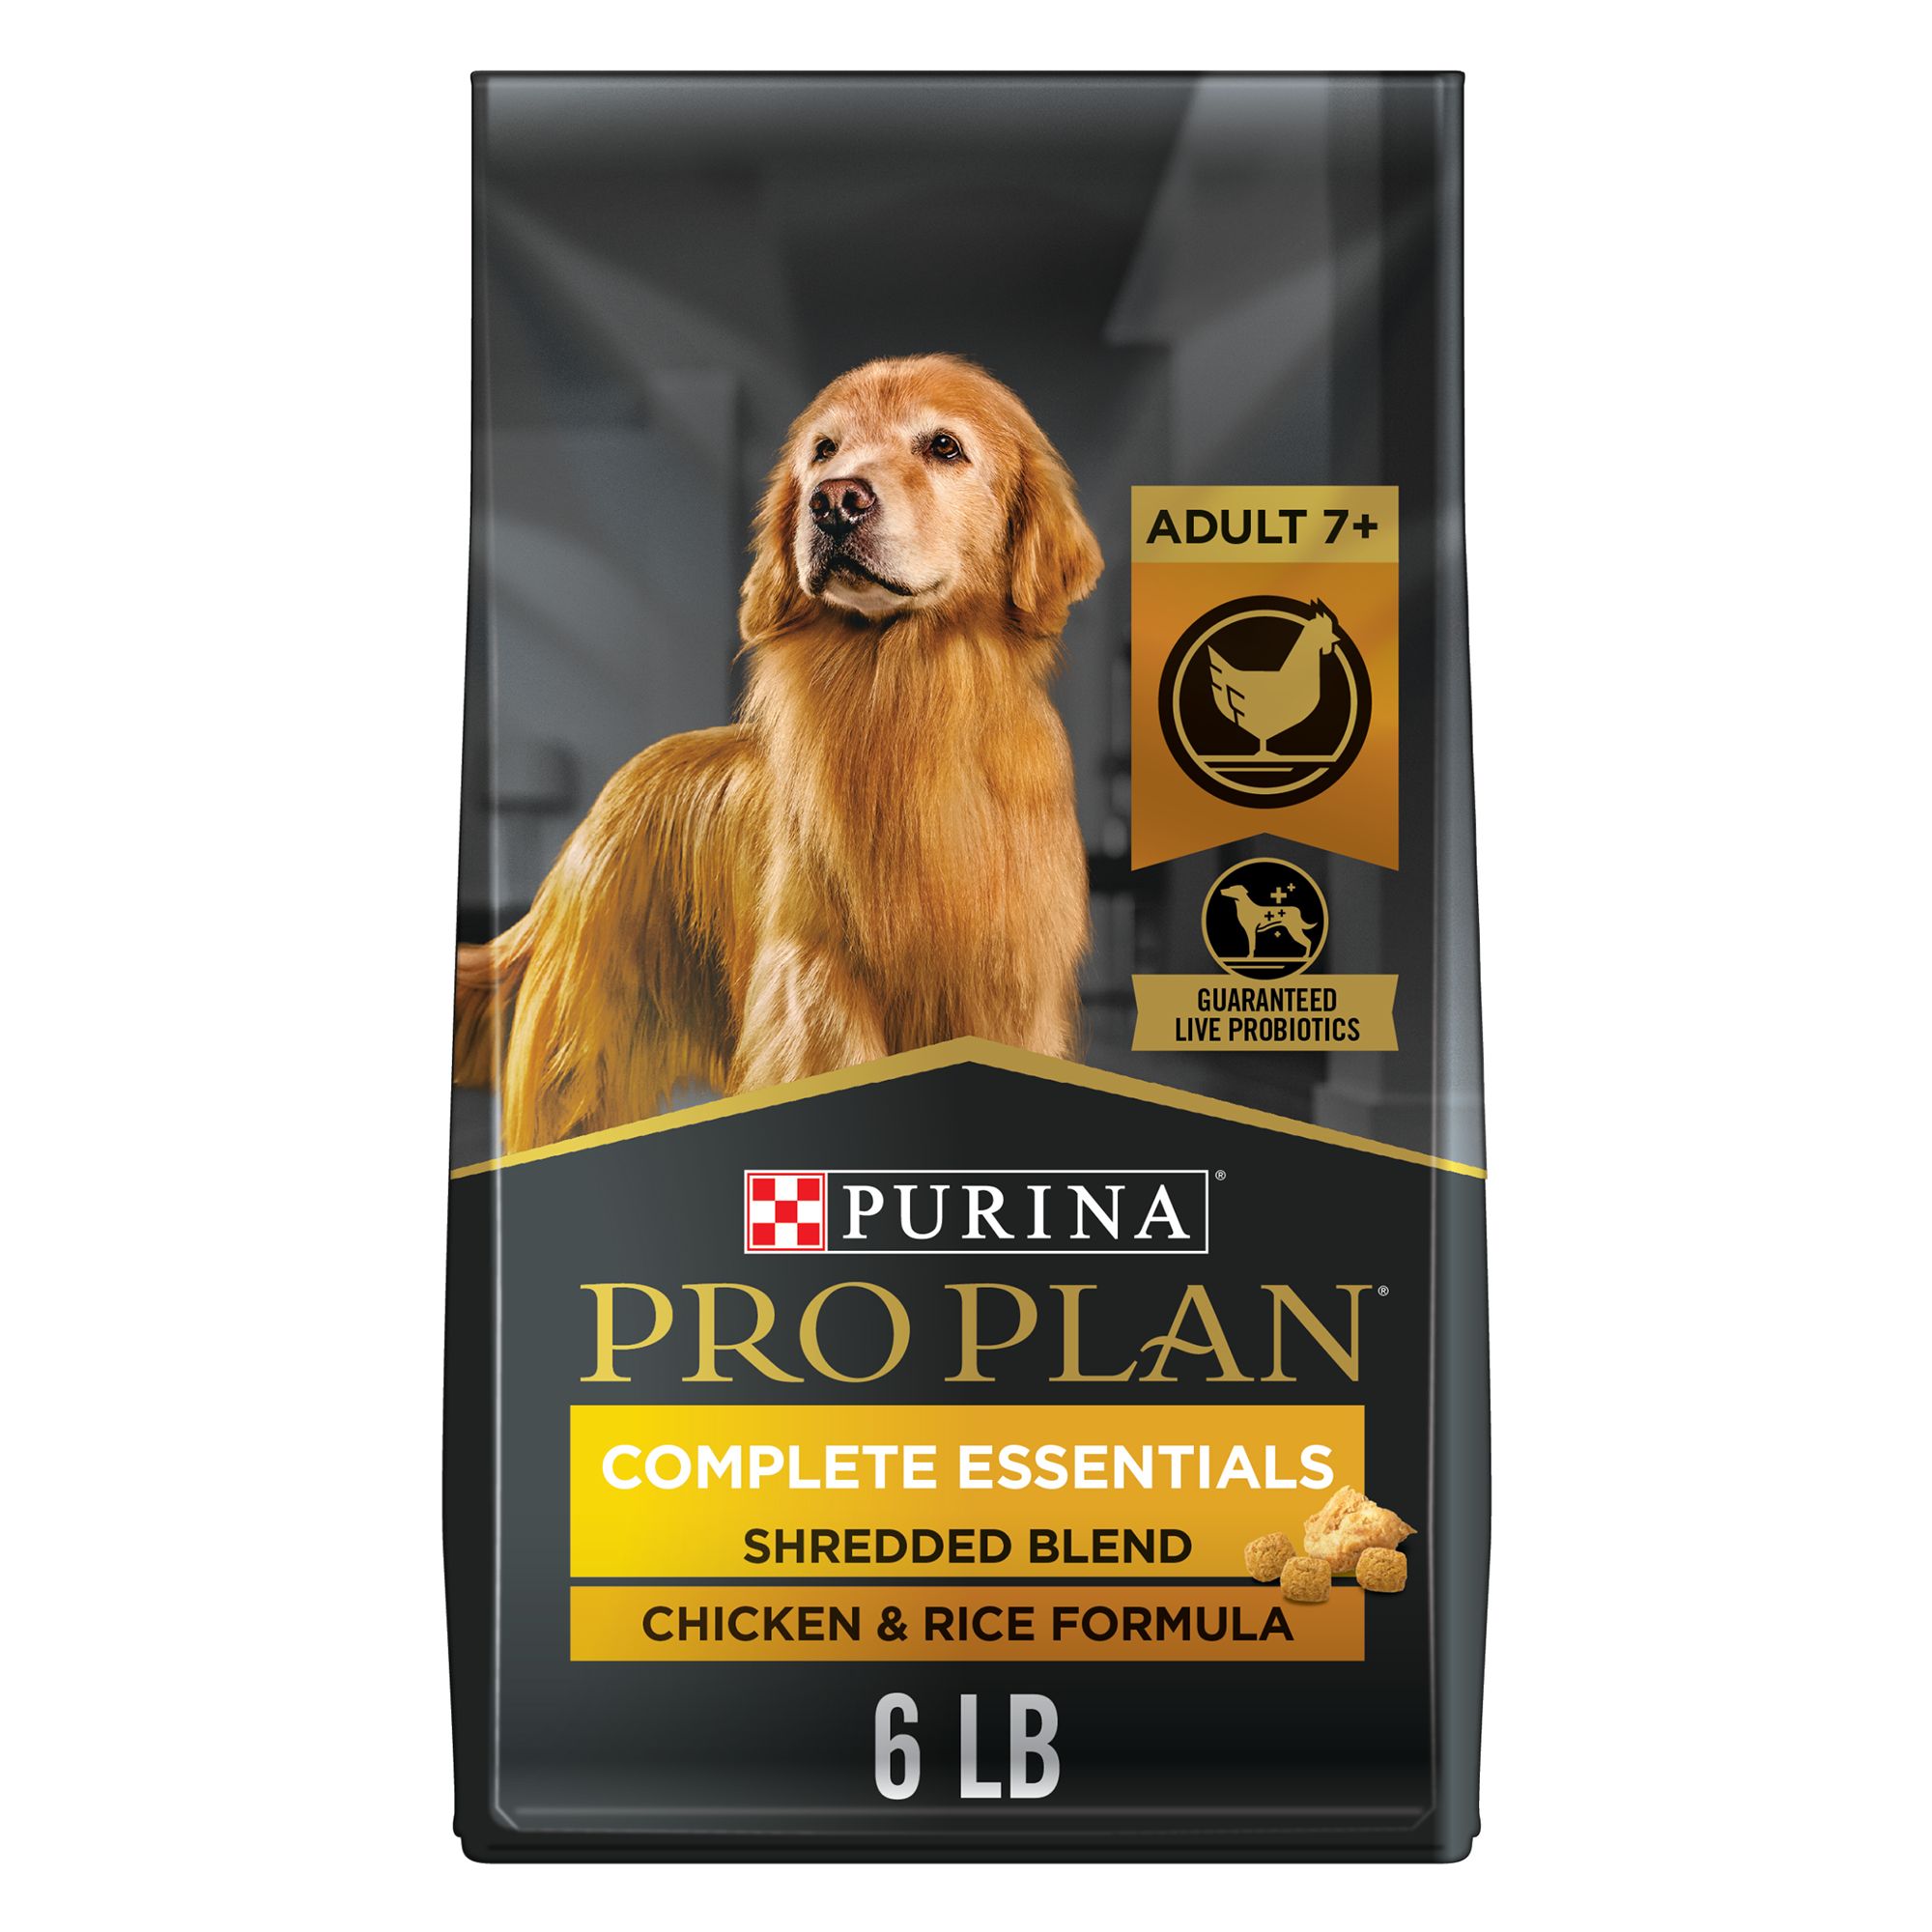 purina pro plan simply fit dog food